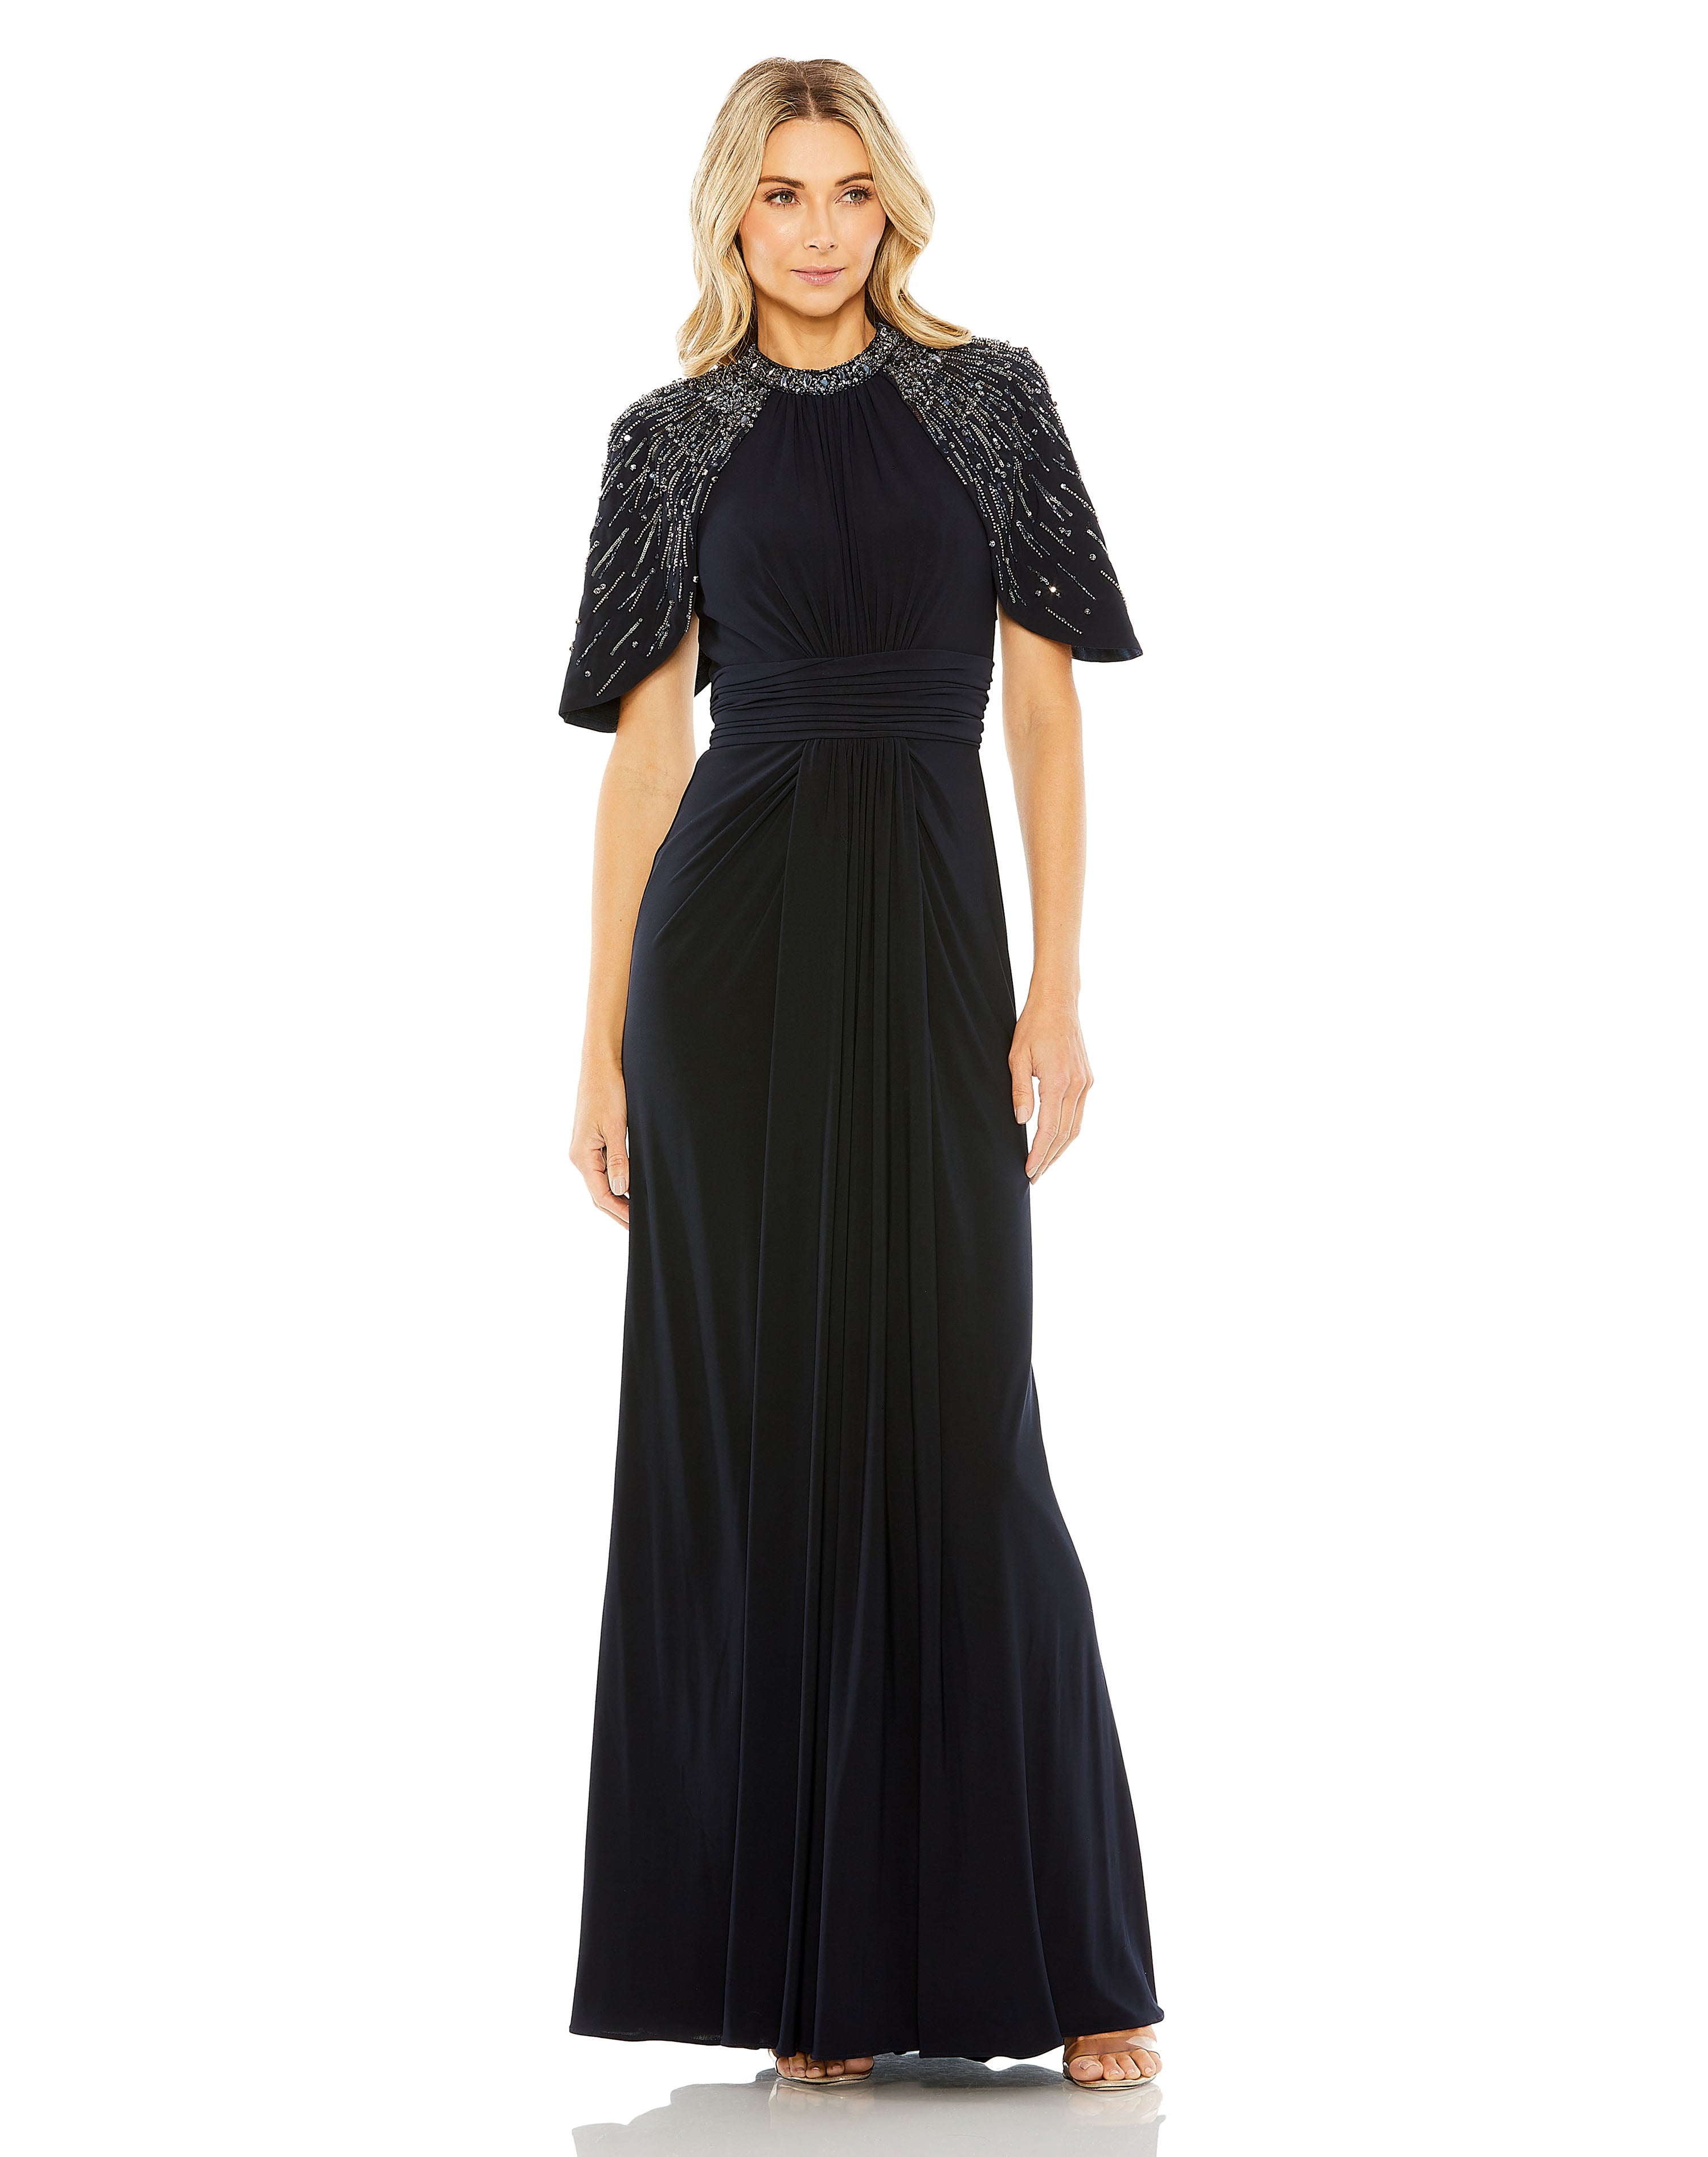 High Neck Column Gown with Embellished Cape